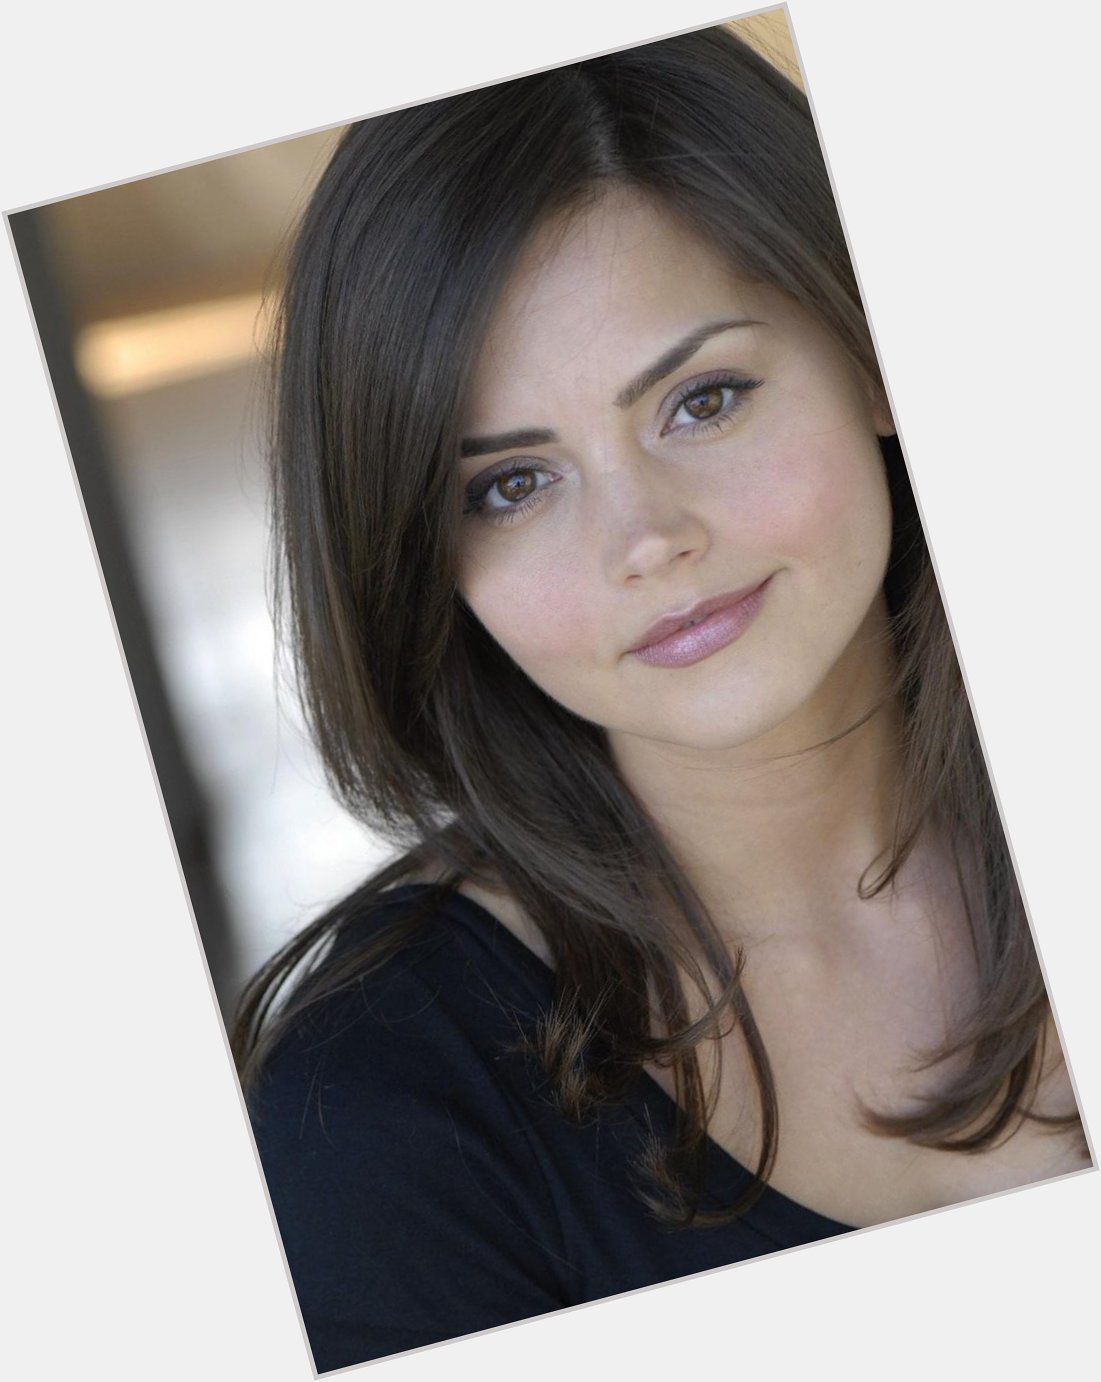 A very happy birthday to the gorgeous Jenna Coleman. Have a fantastic day you! 